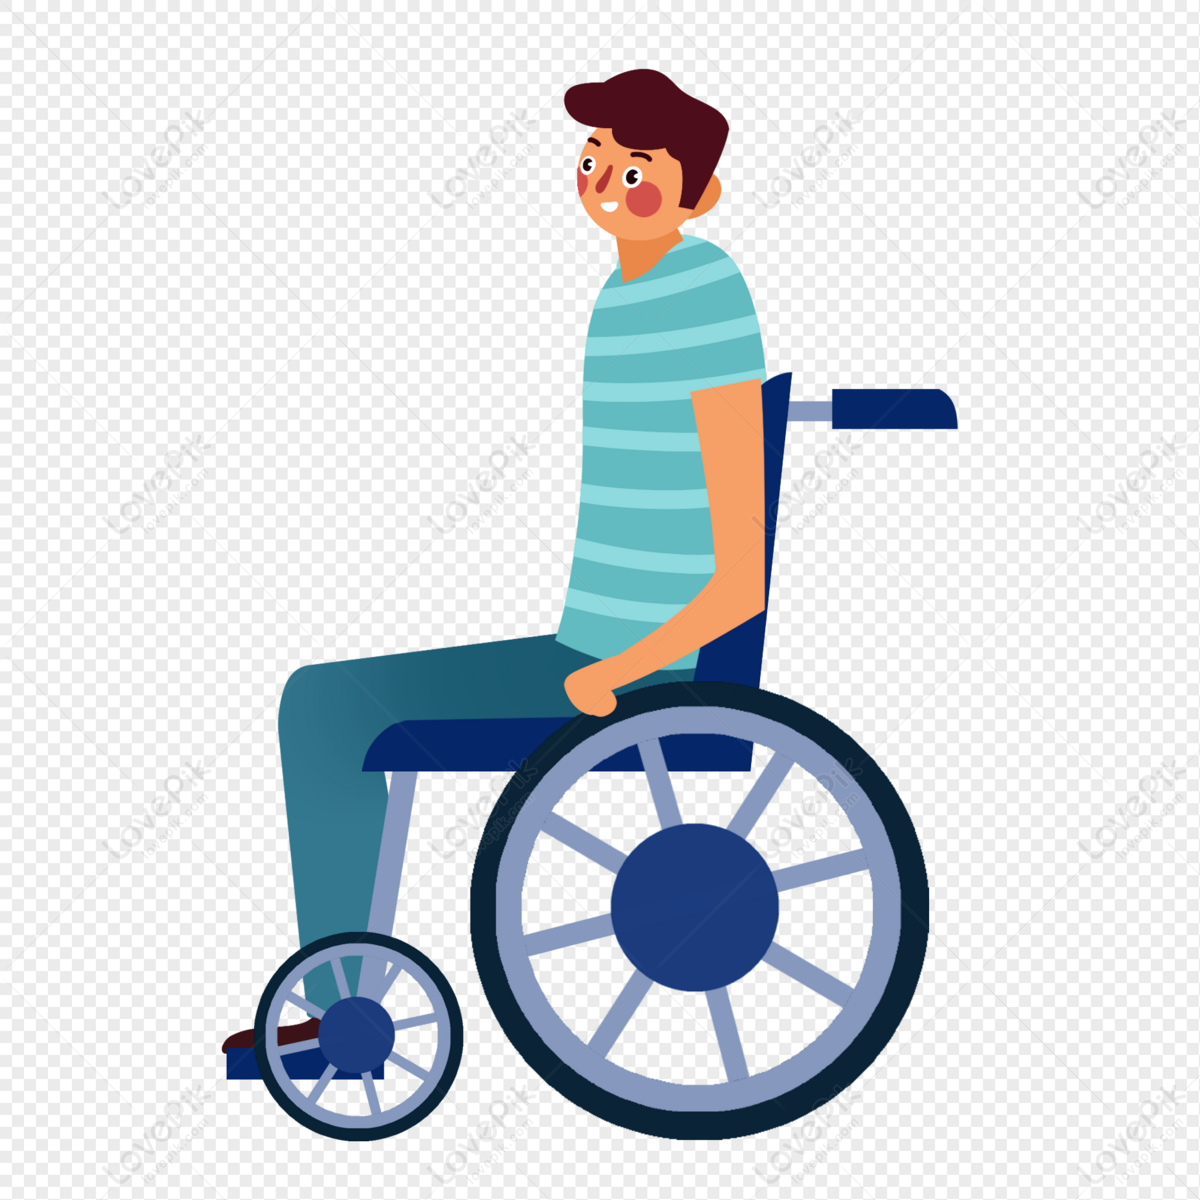 Wheelchair PNG Image Free Download And Clipart Image For Free Download -  Lovepik | 401427941